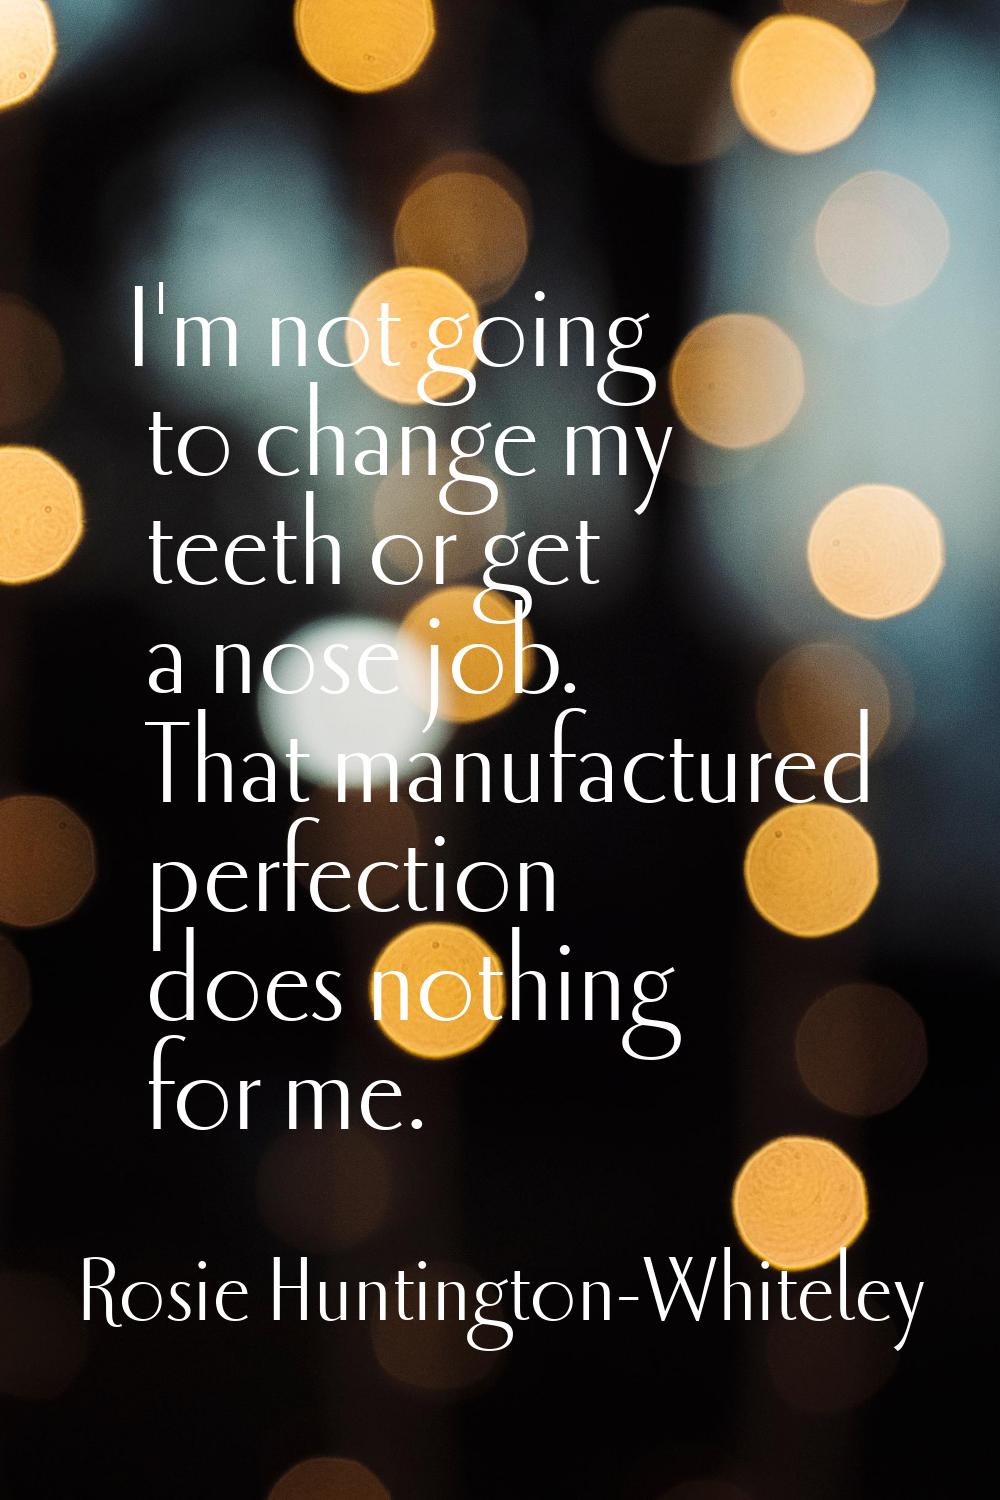 I'm not going to change my teeth or get a nose job. That manufactured perfection does nothing for m